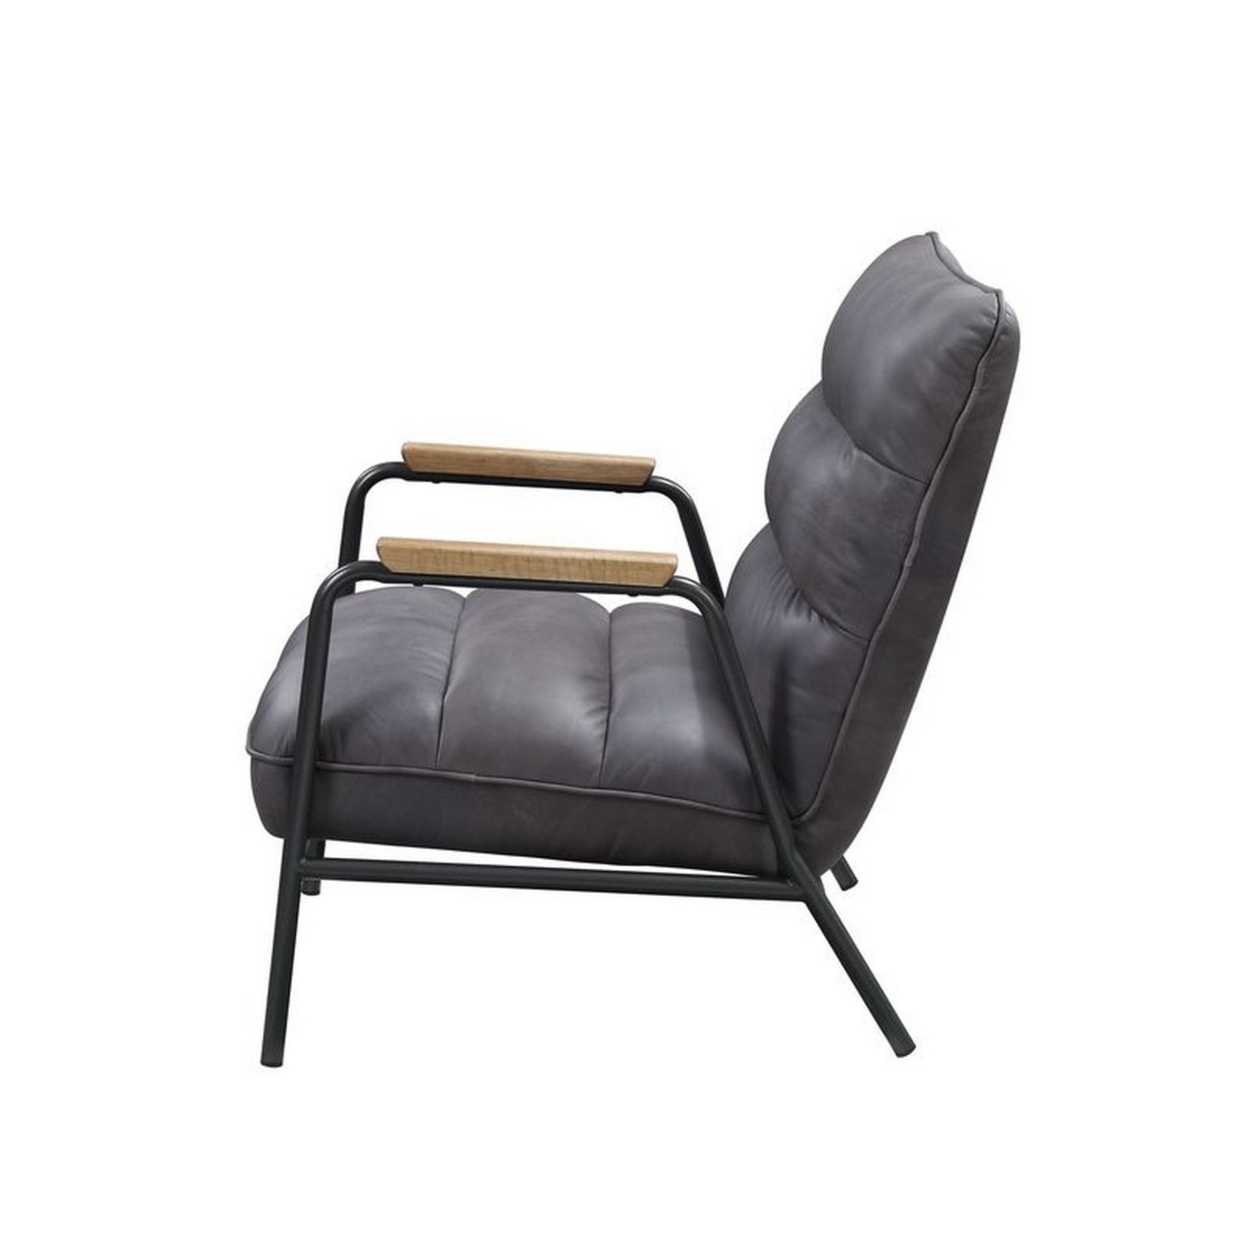 Accent Chair With Leatherette Seat And Tufted Details, Gray- Saltoro Sherpi